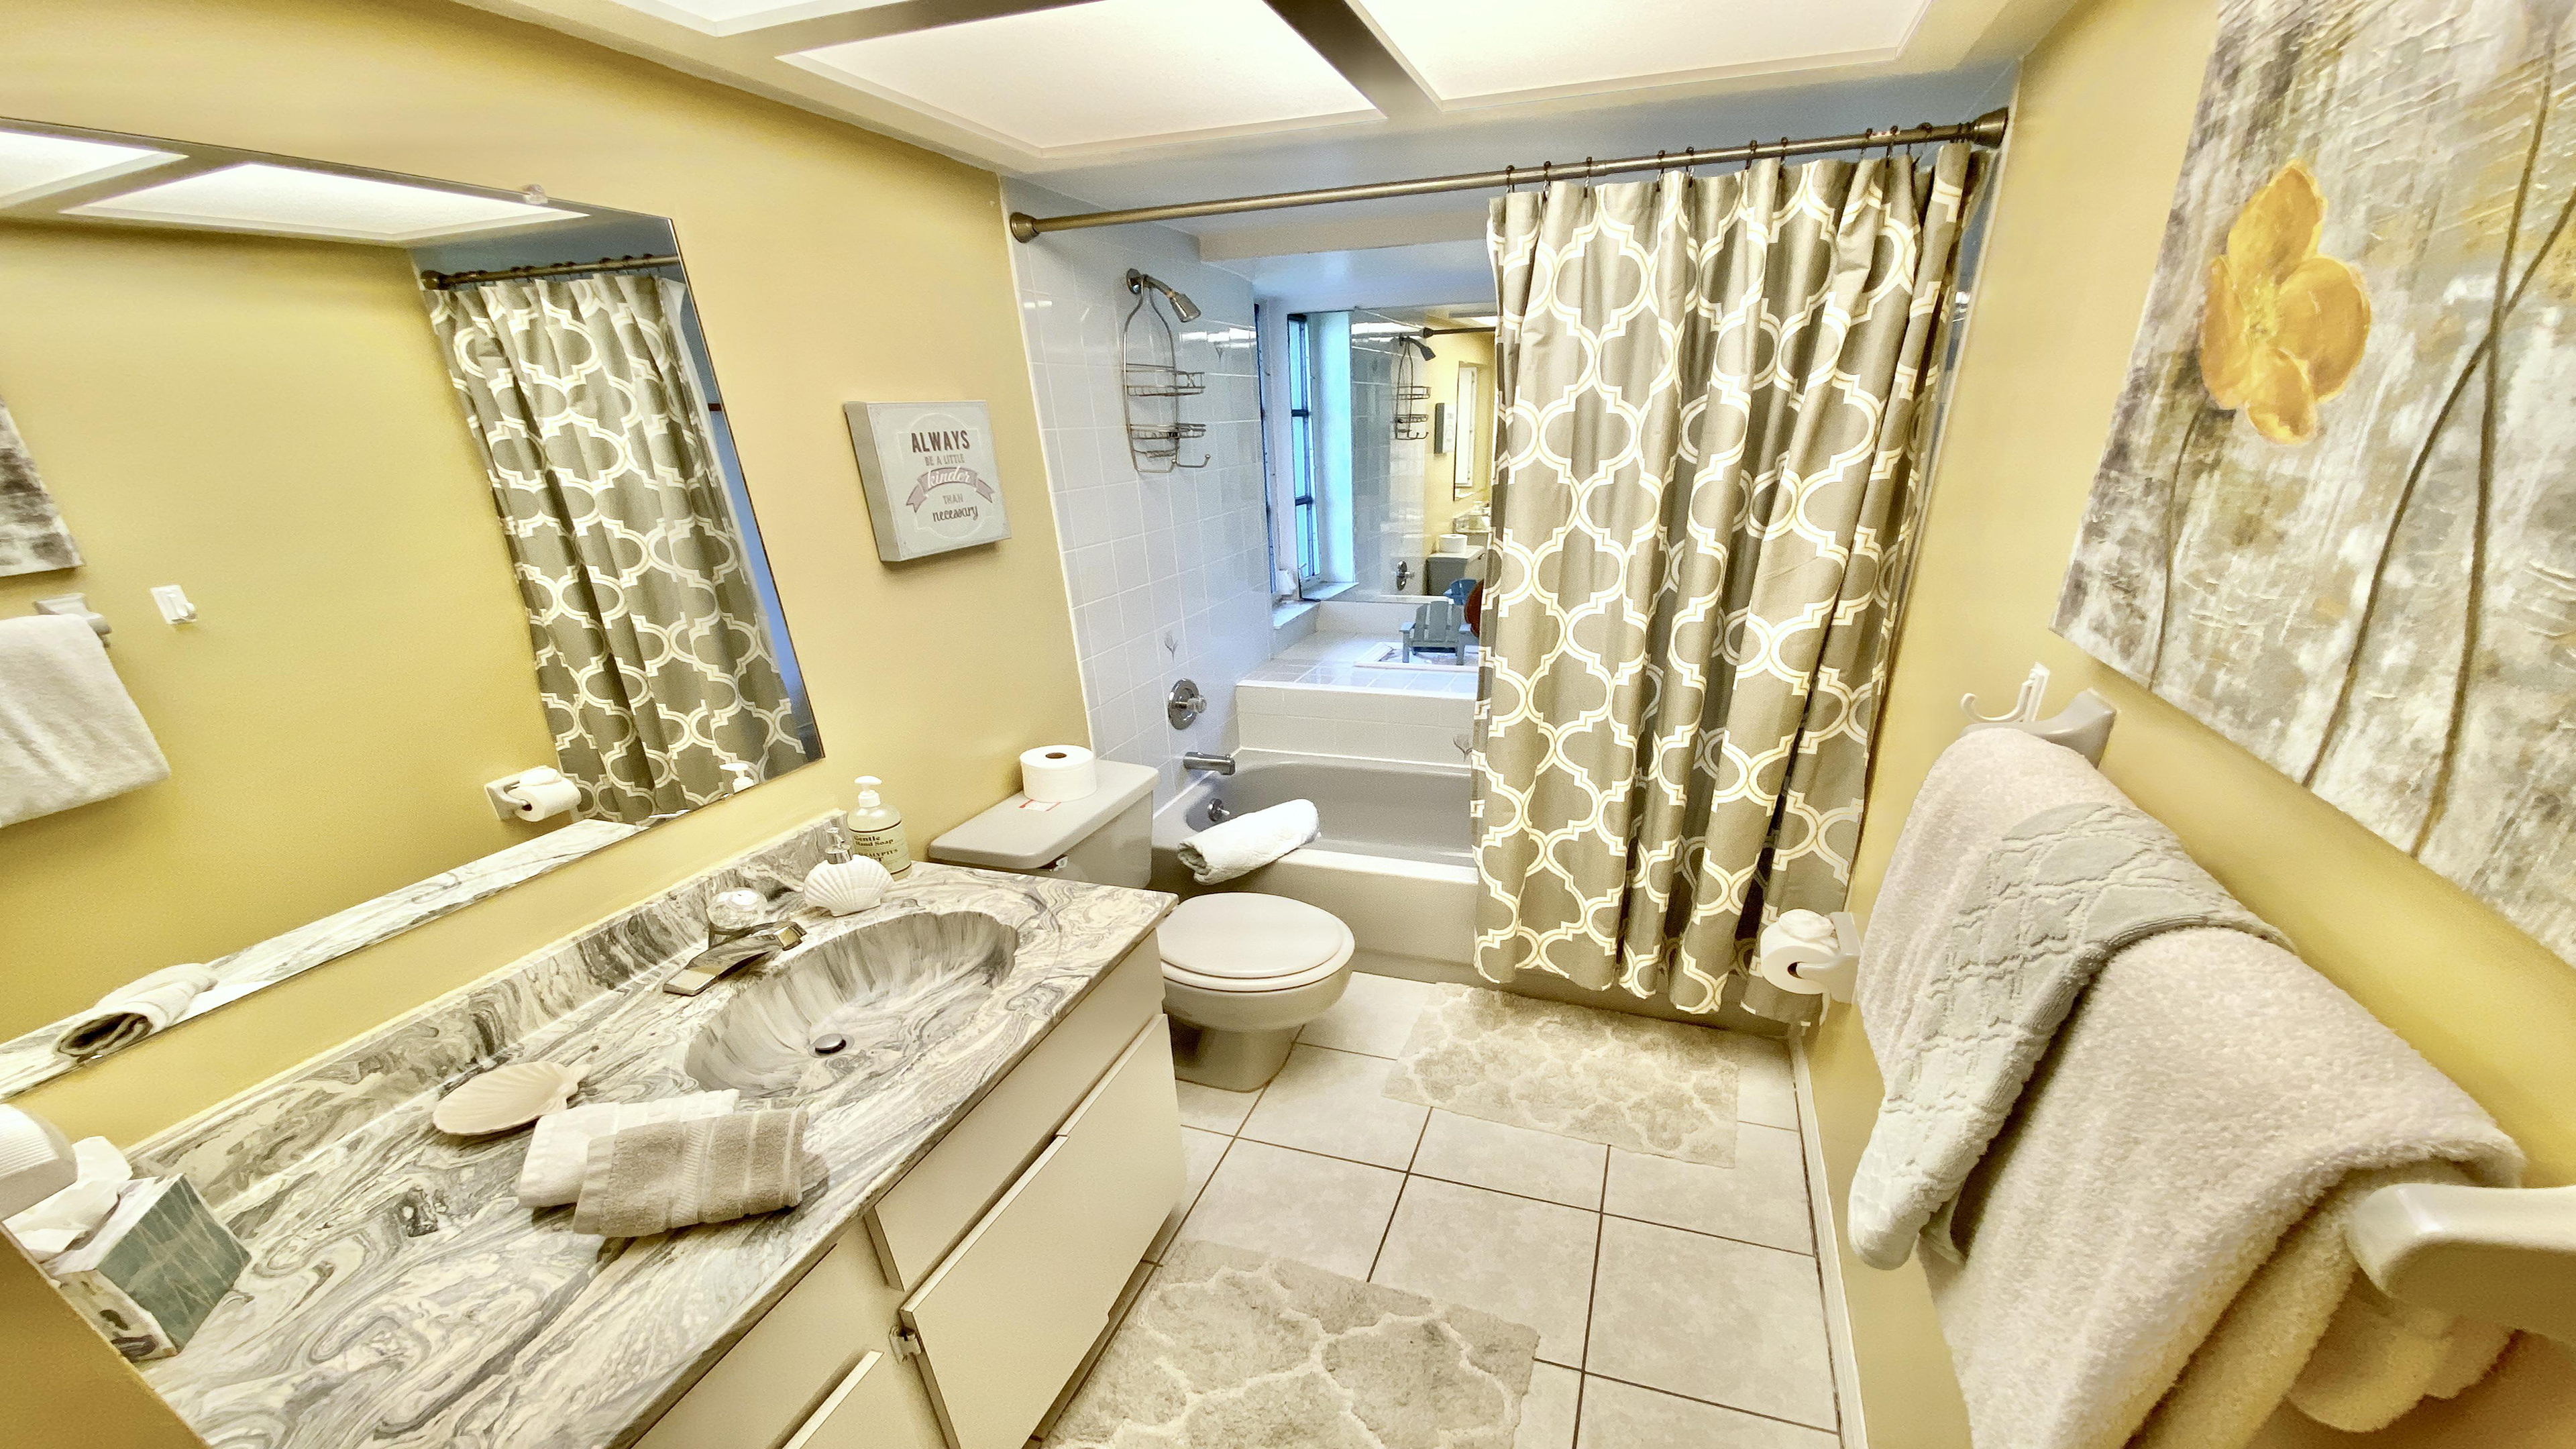 The yellow bathroom with bathtub shower,sink and toilet